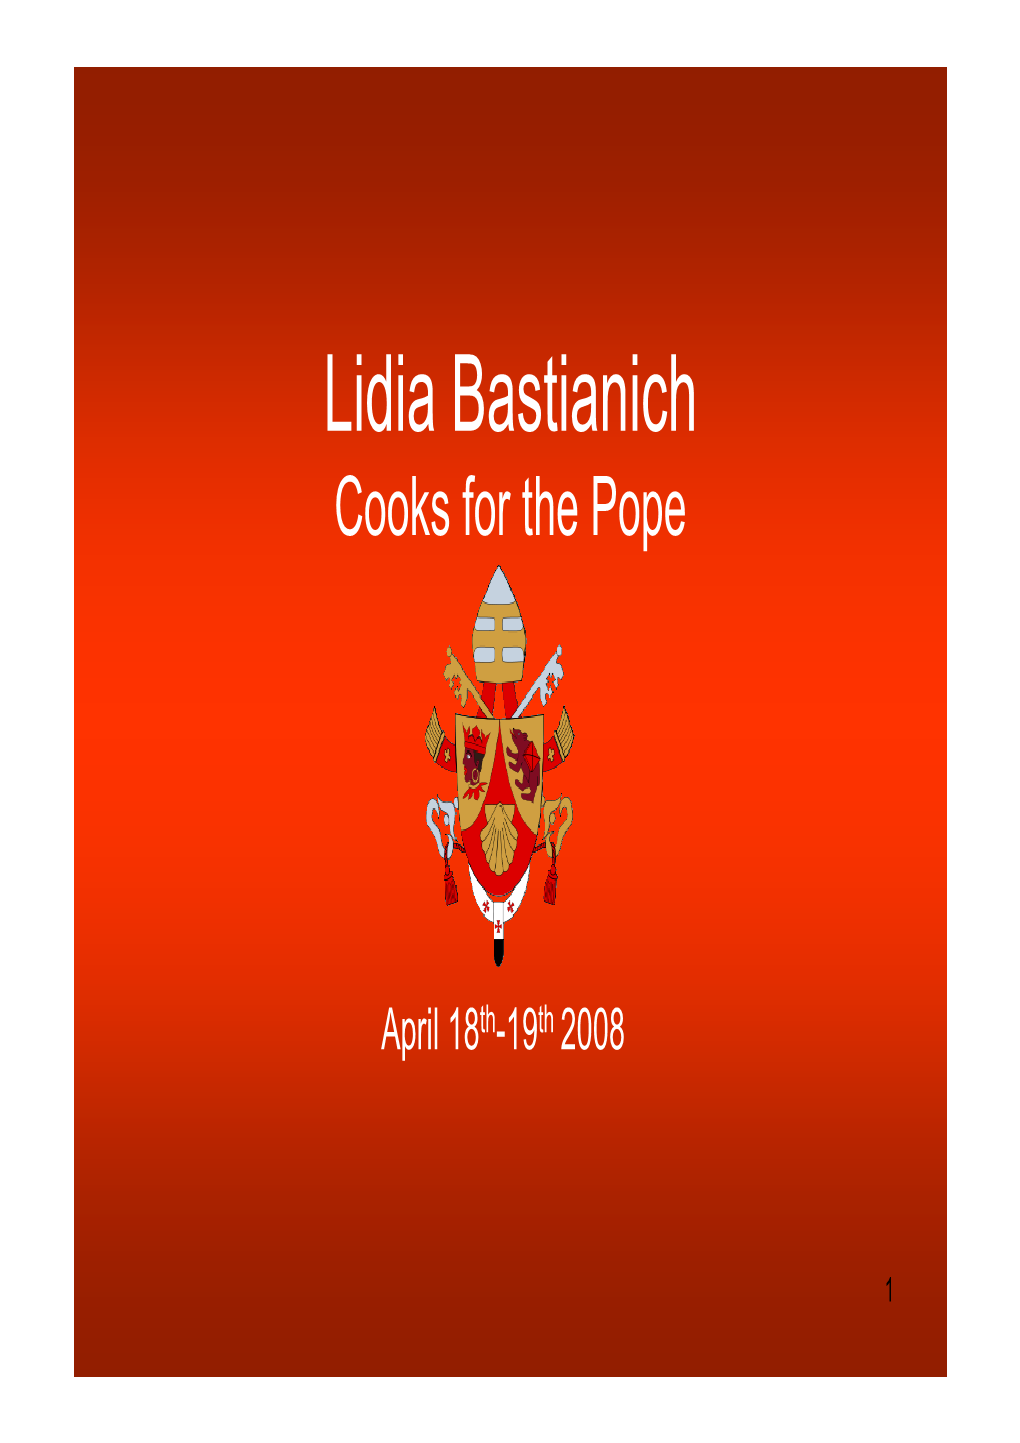 Lidia Bastianich Cooks for the Pope